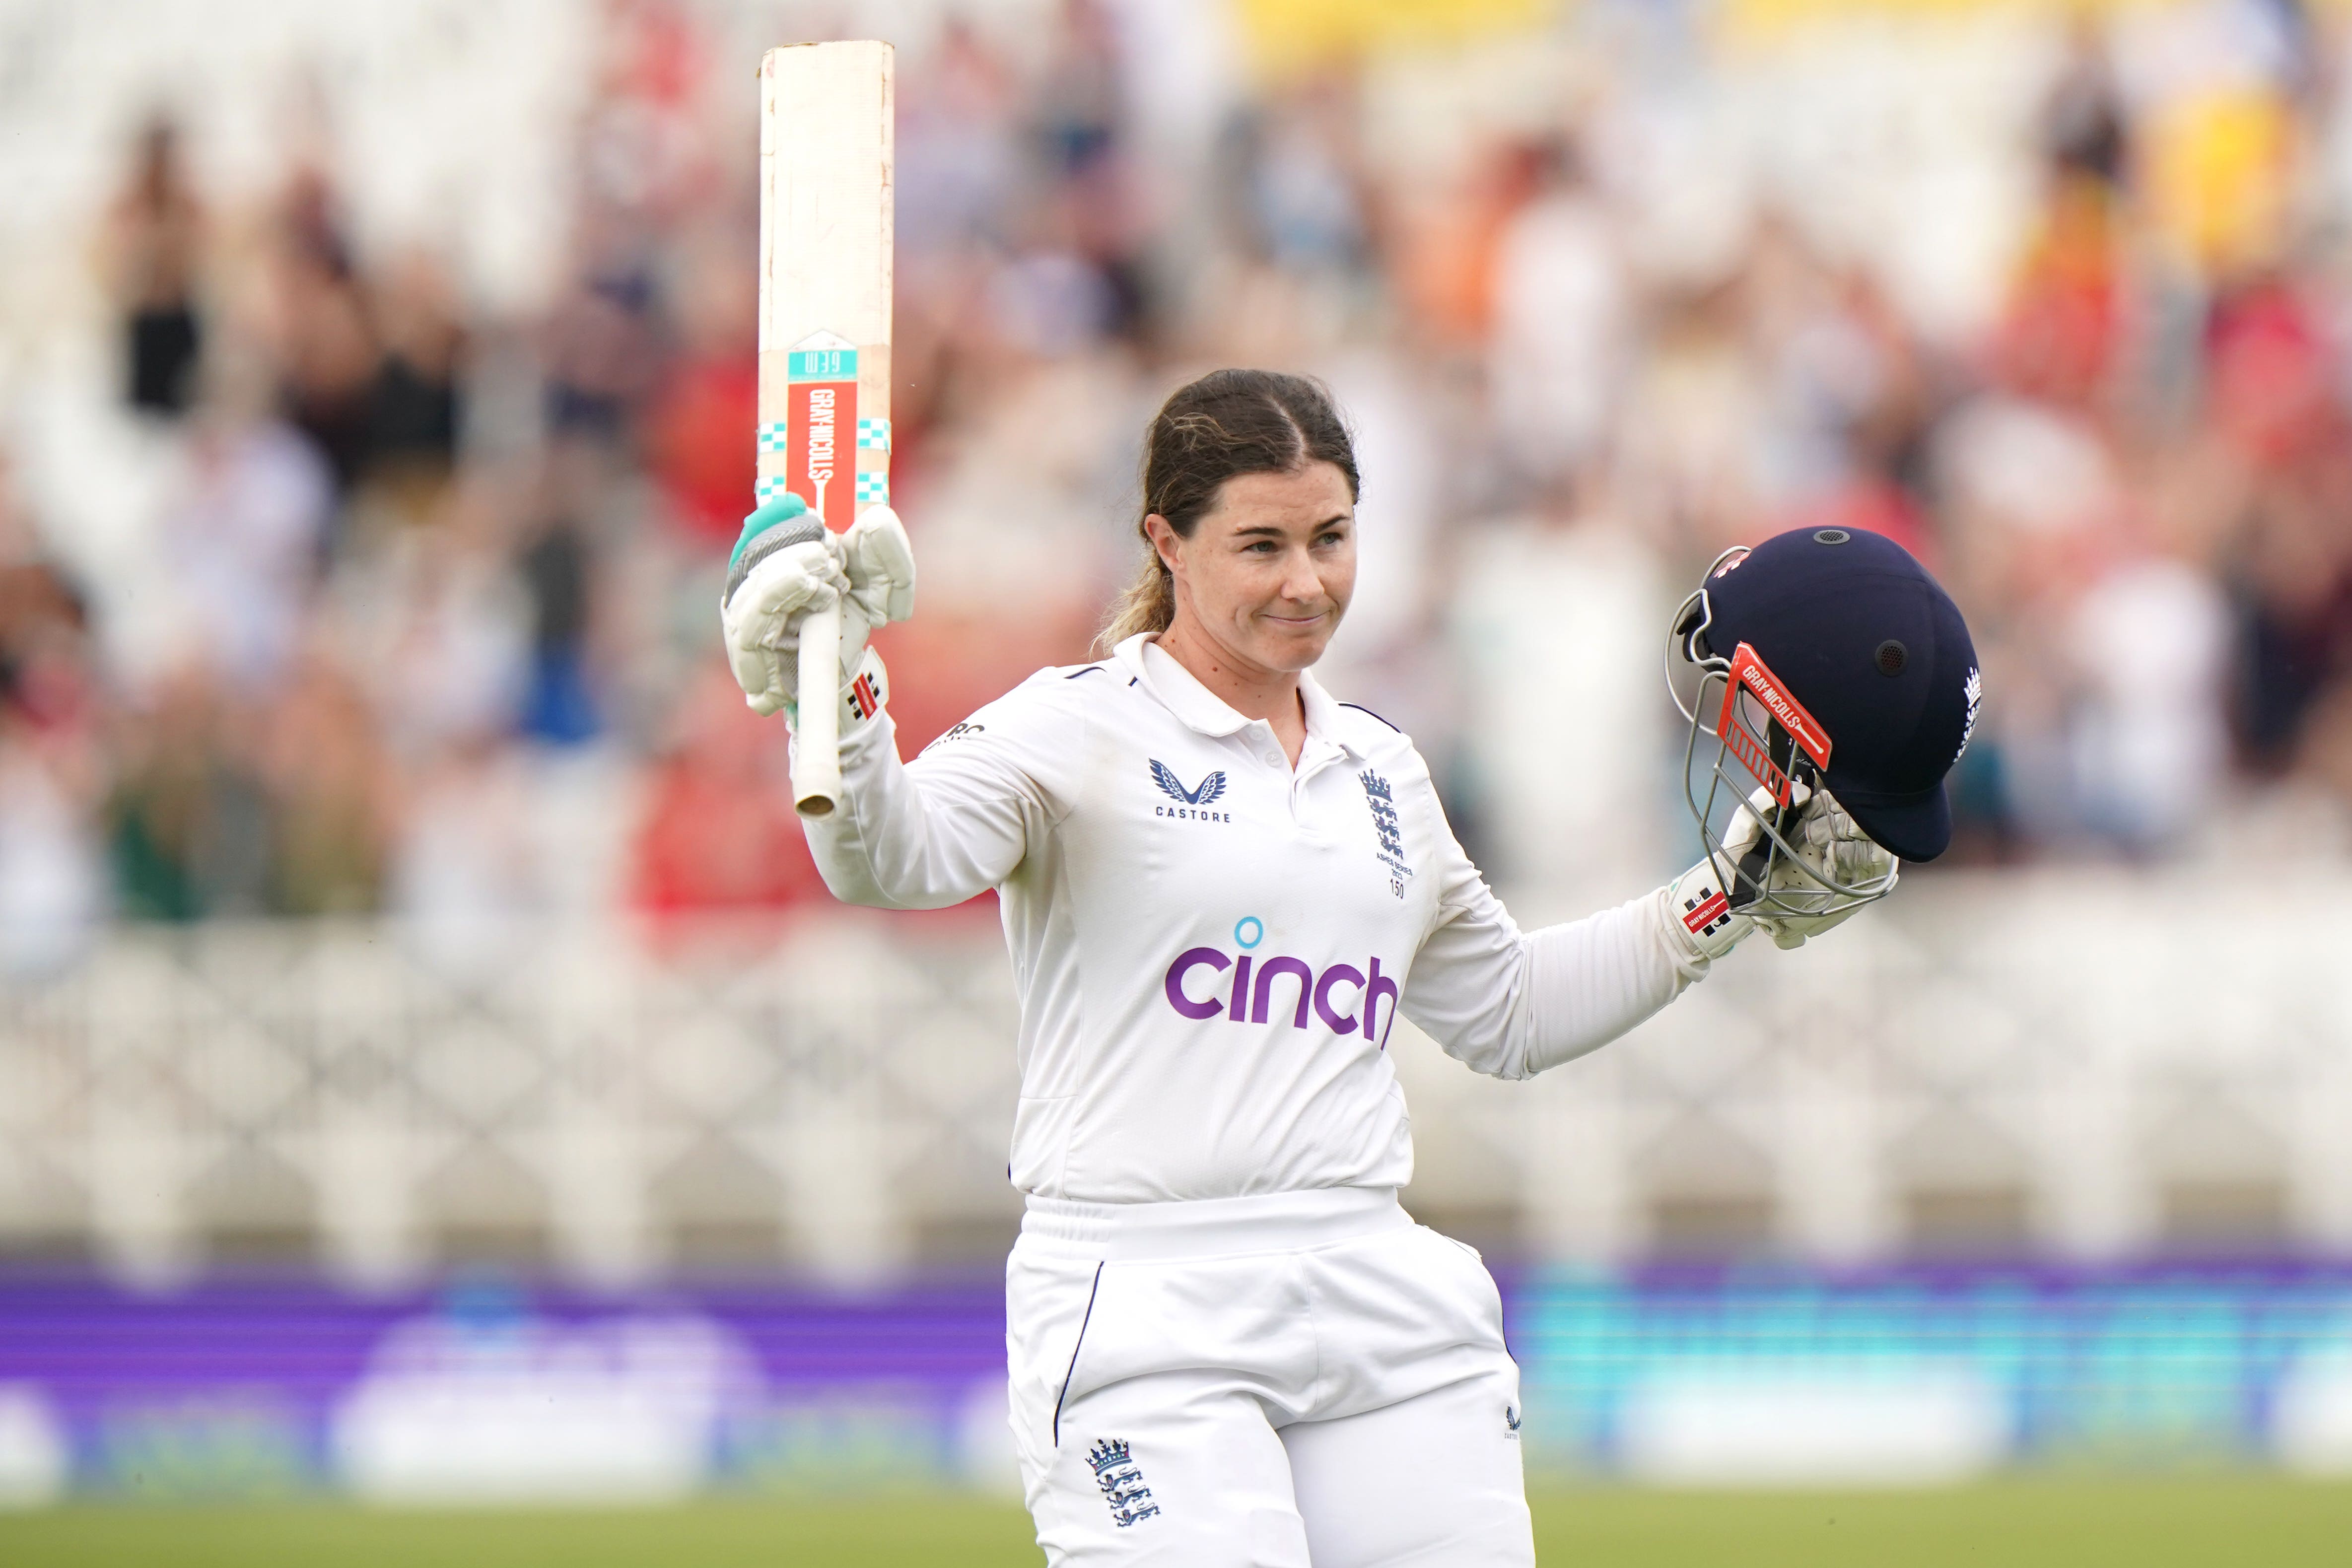 Tammy Beaumont made a double century in the lone Test match of this Women’s Ashes series